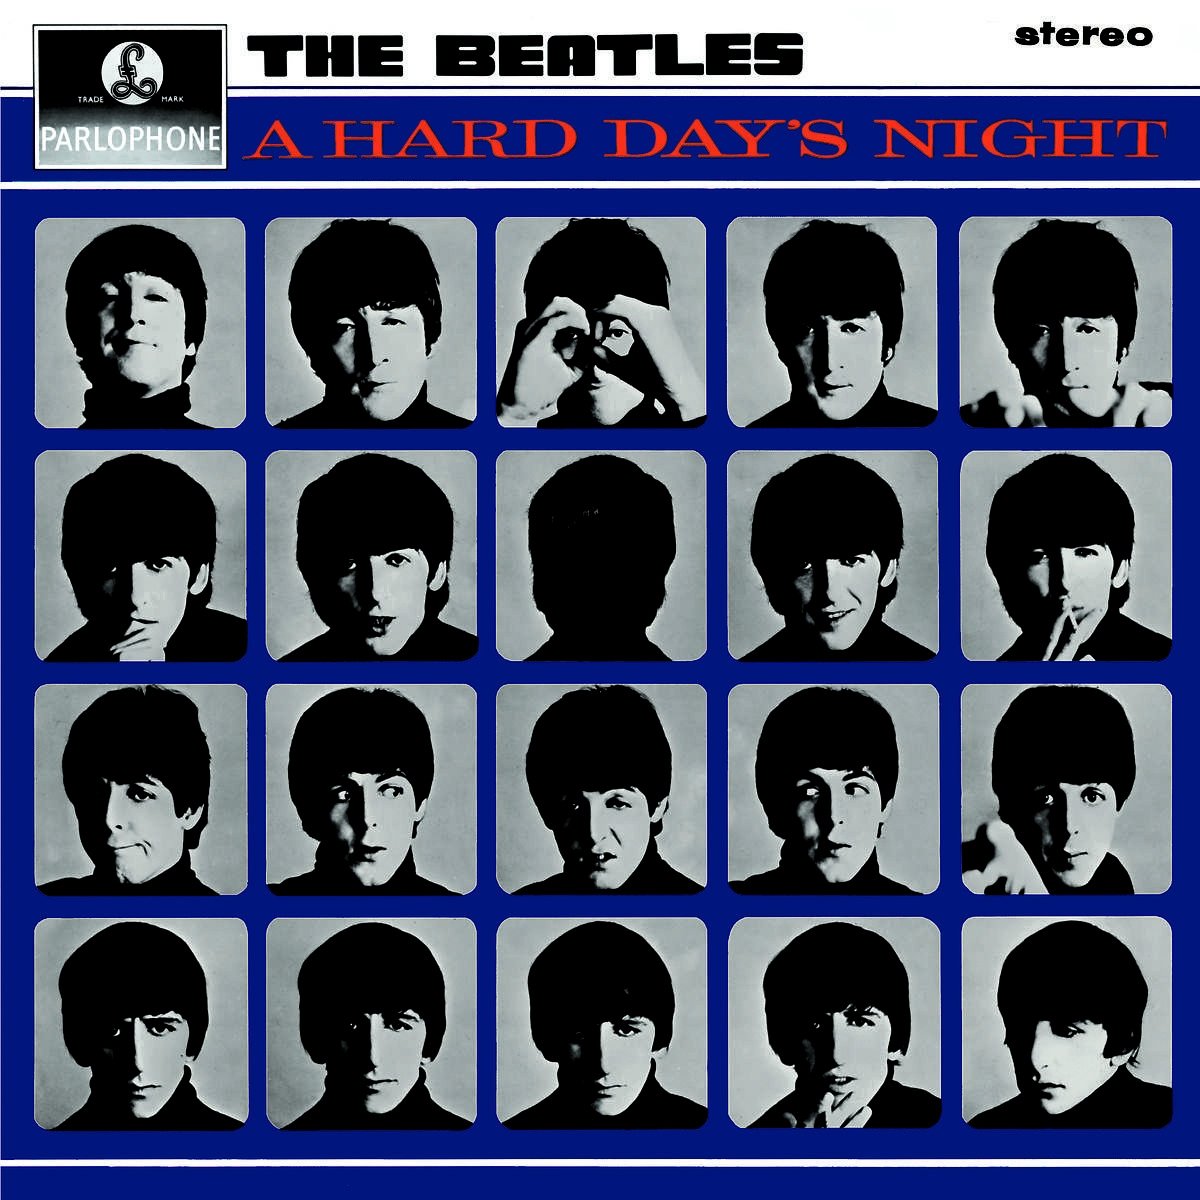 The Beatles-A Hard Days Night-REMASTERED-CD-FLAC-2009-FiXIE Download